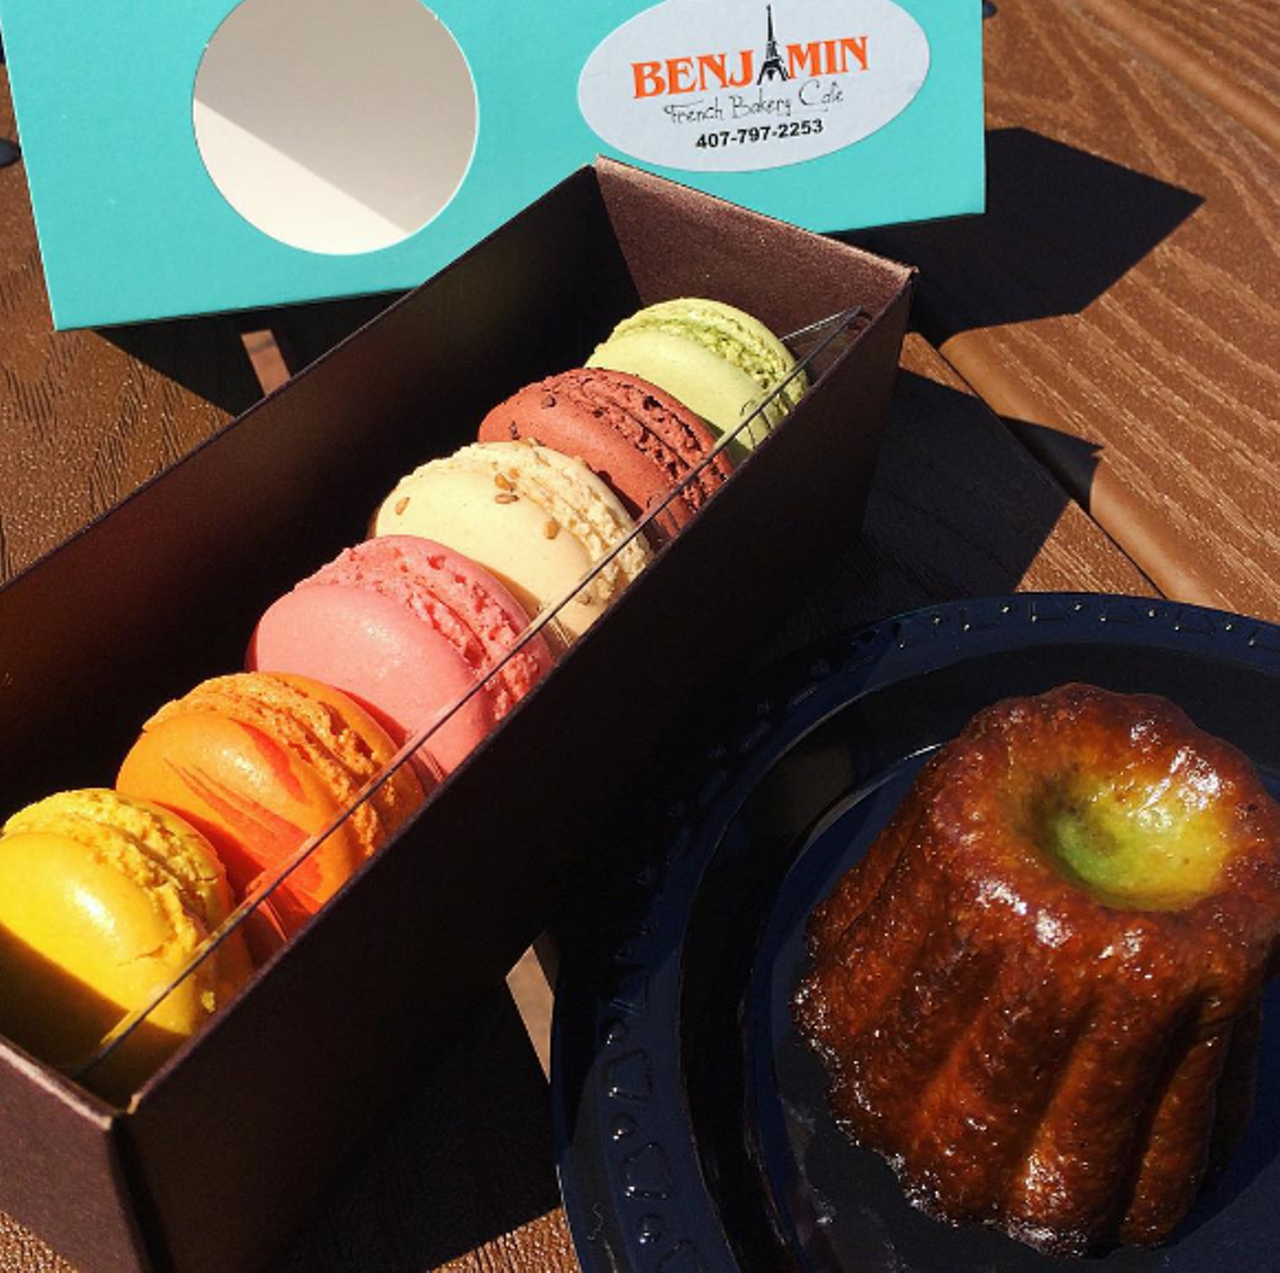 Benjamin French Bakery
716 E. Washington St., 407-797-2253
This French bakery has rotating flavors of appetizing and brightly colored macarons, which can be bought in a box of six or 12.
Photo via shamoozie/Instagram